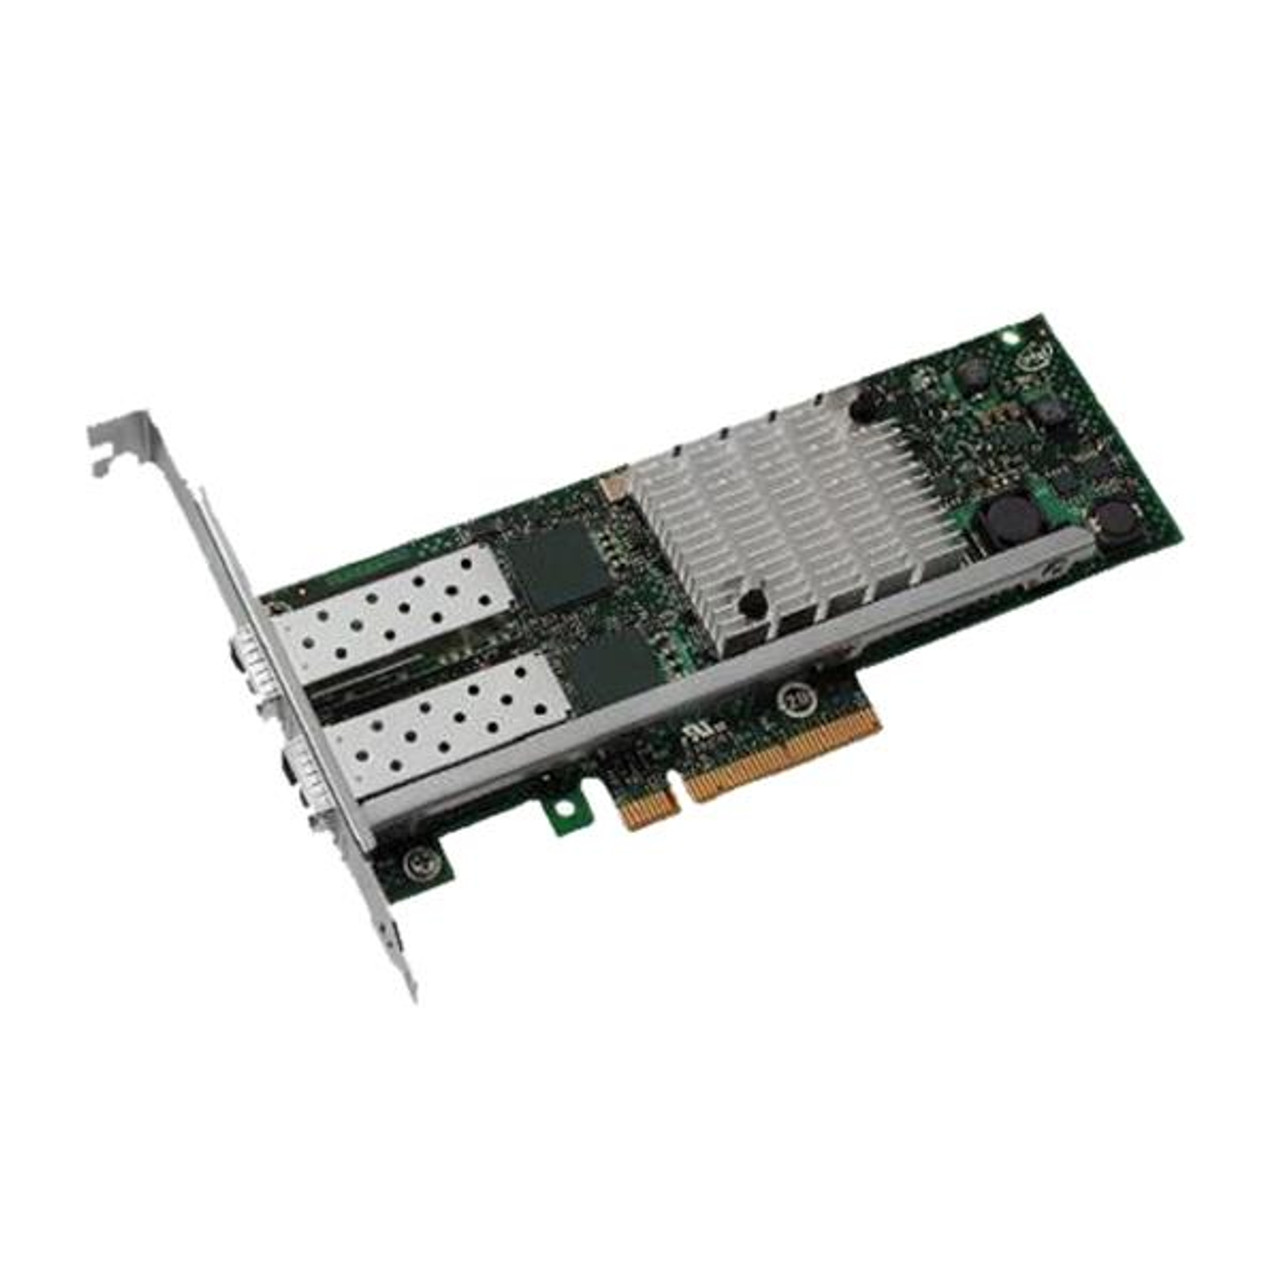 01V3J Dell Dual-Ports SFP+ 10Gbps 10 Gigabit Ethernet PCI Express 2.0 x8 Converged Server Network Adapter by Intel